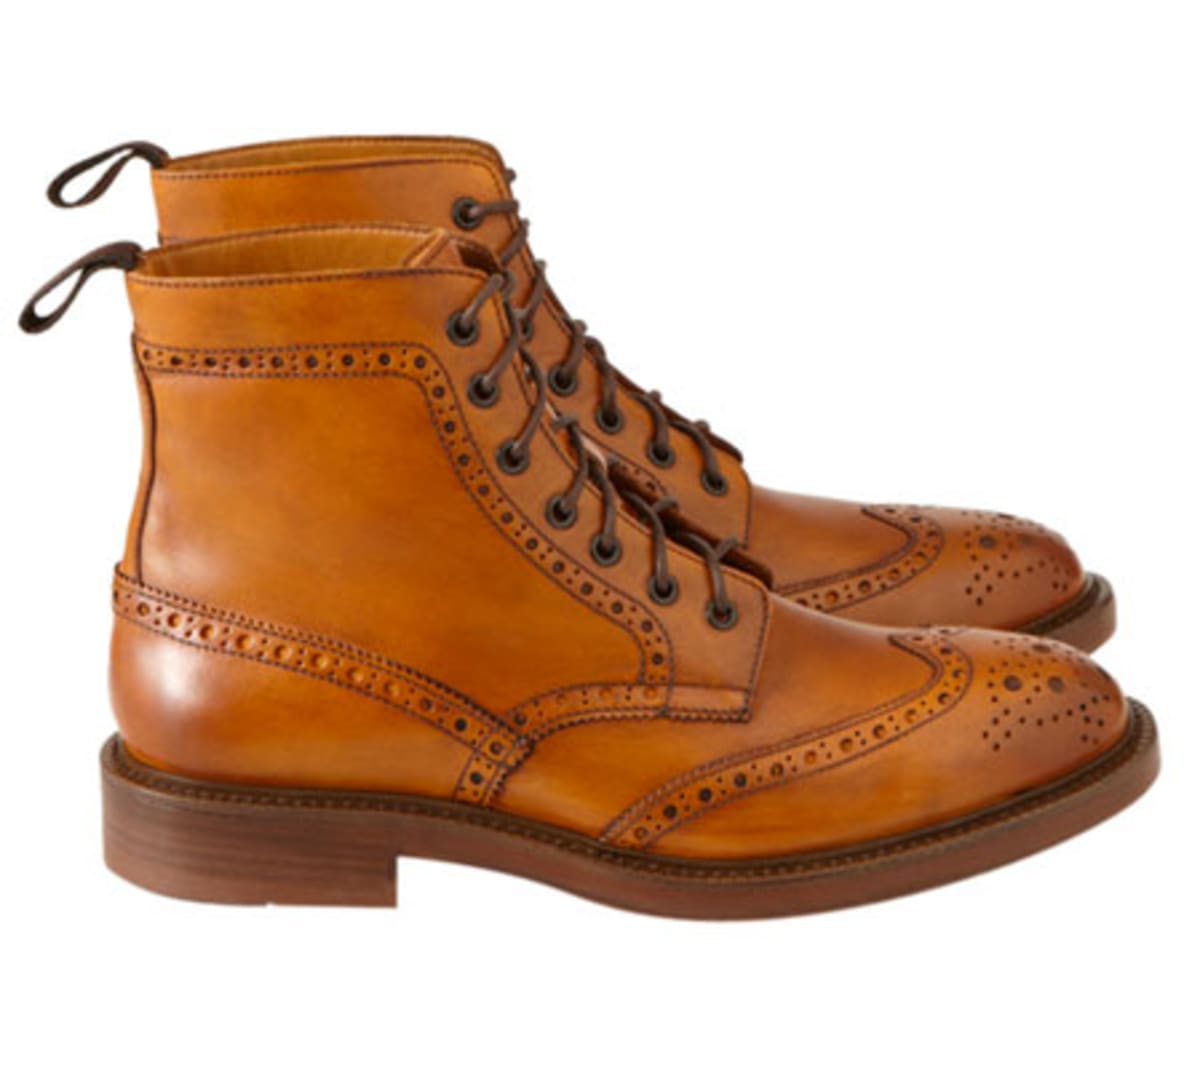 Mr. B's Has The Most Affordable Wingtip Brogue Boot For Winter | Complex